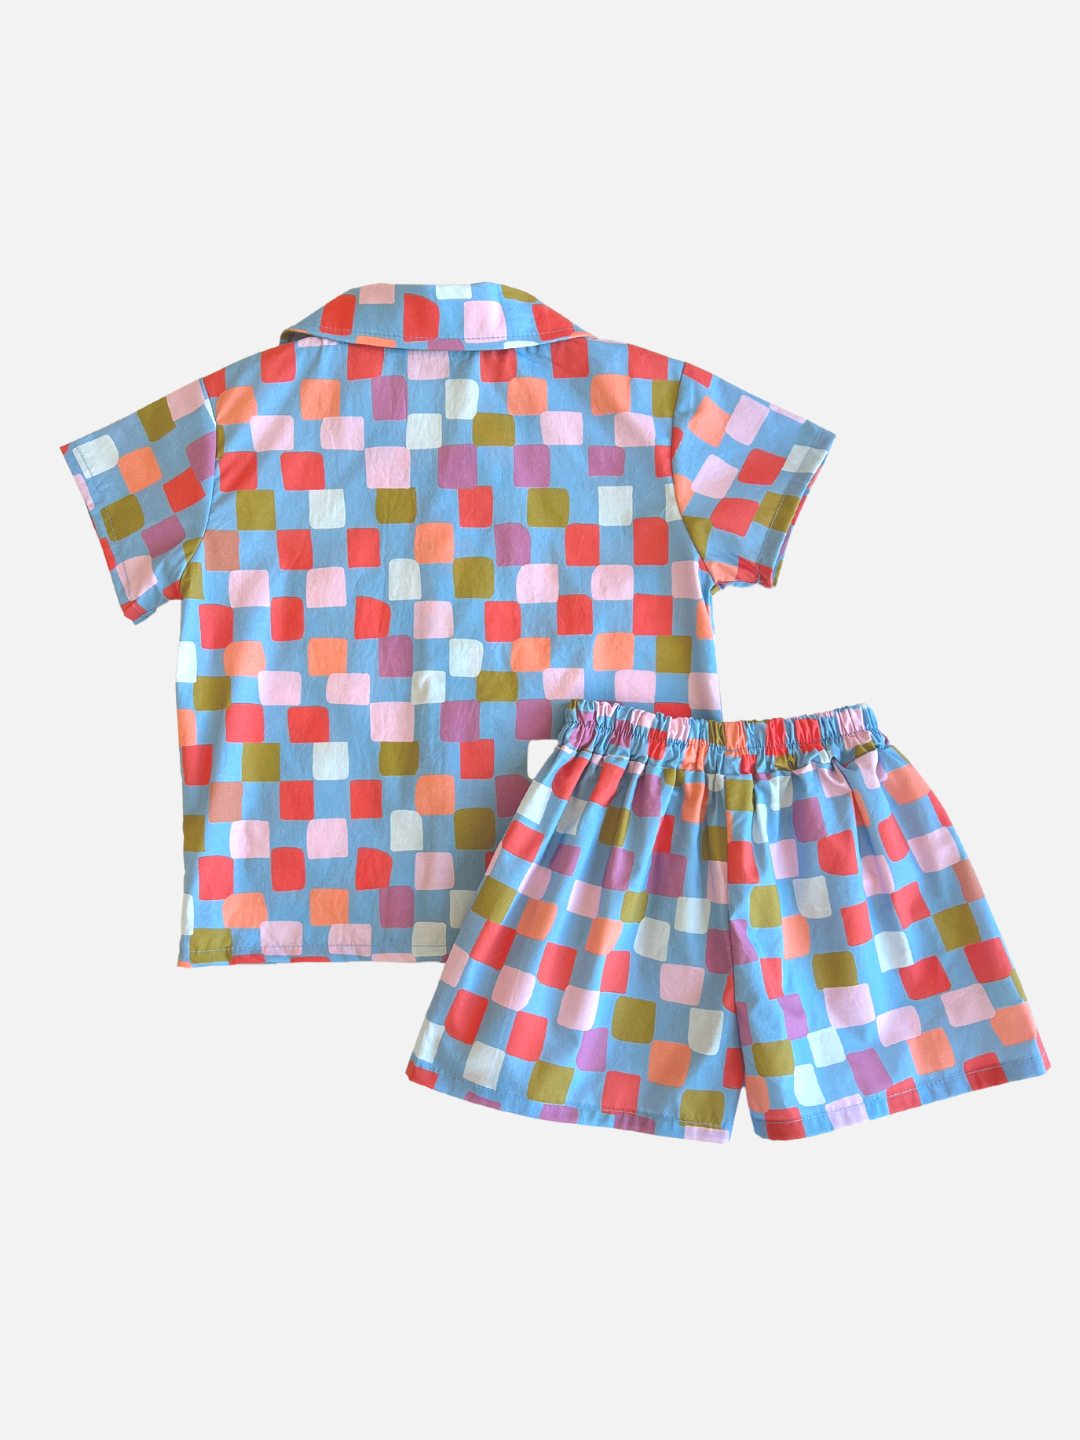 A kids' shirt and shorts set in a pattern of red, orange, pink, lilac and green squares on a blue background, back view